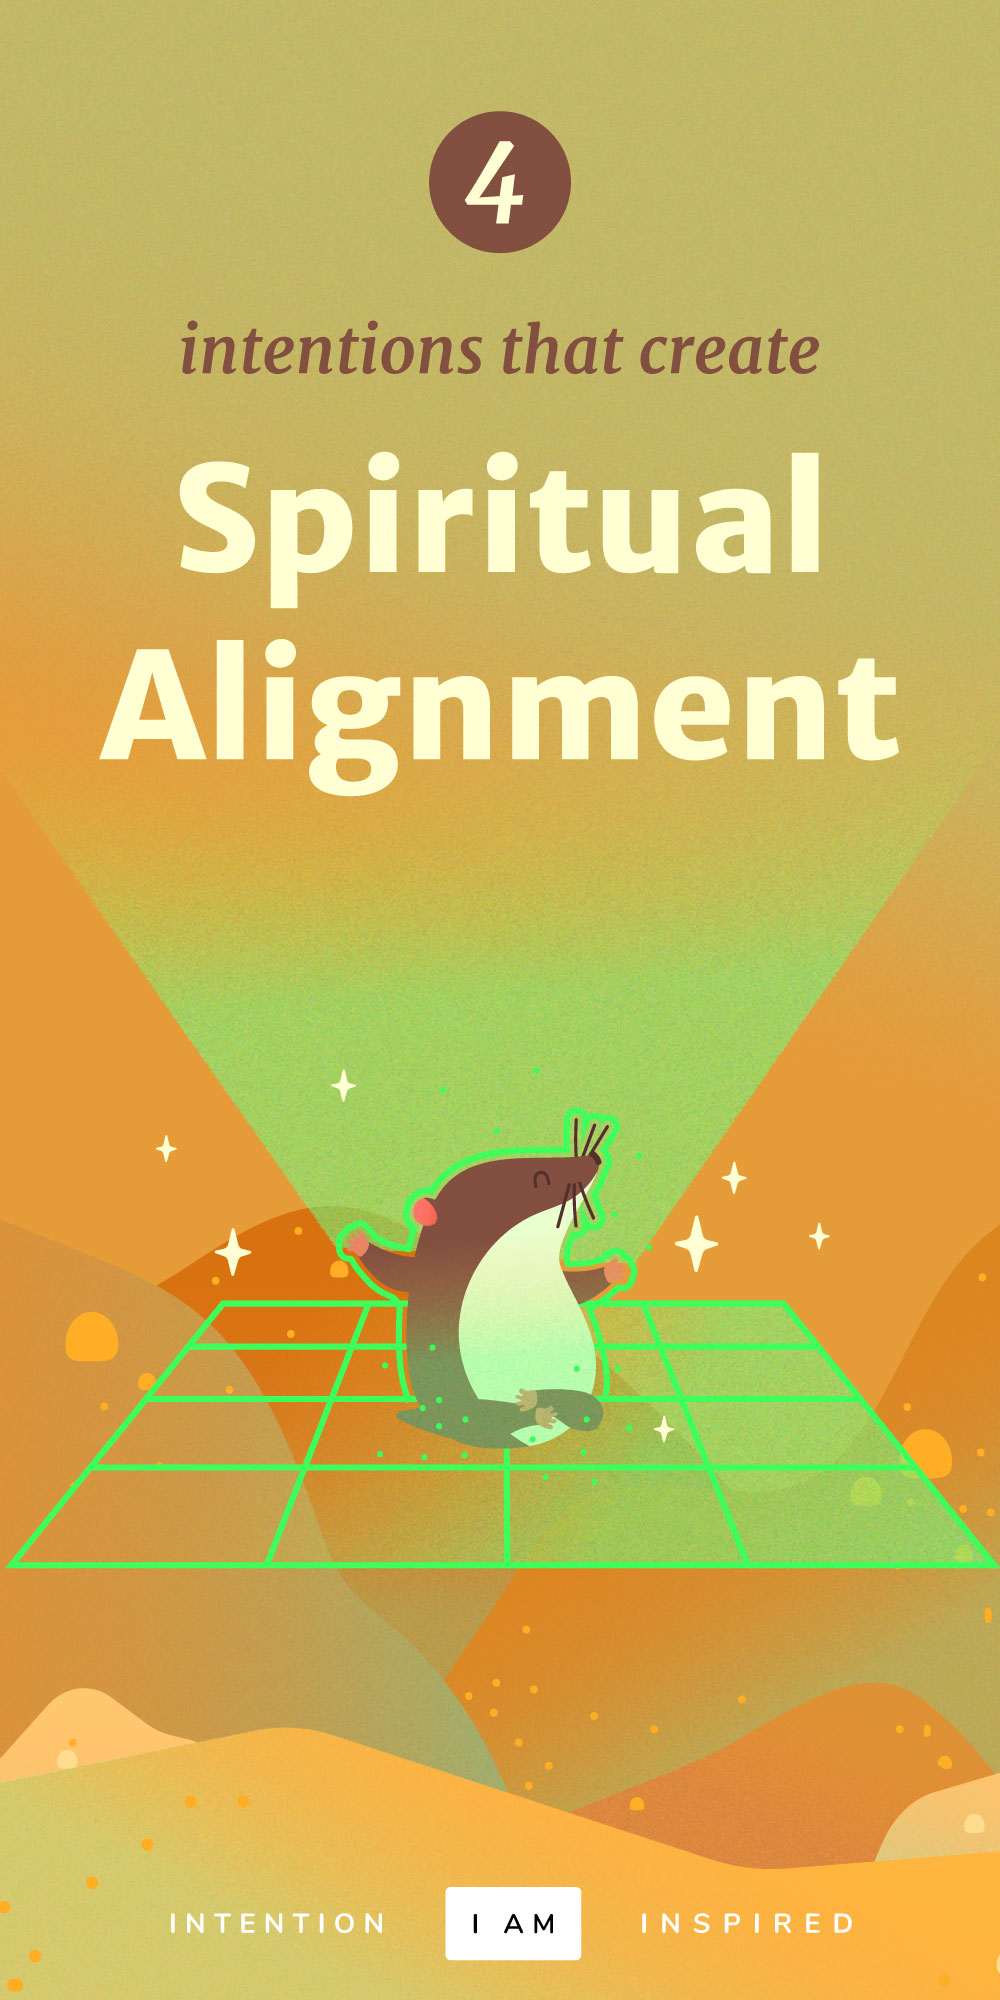 intentions that create spiritual alignment